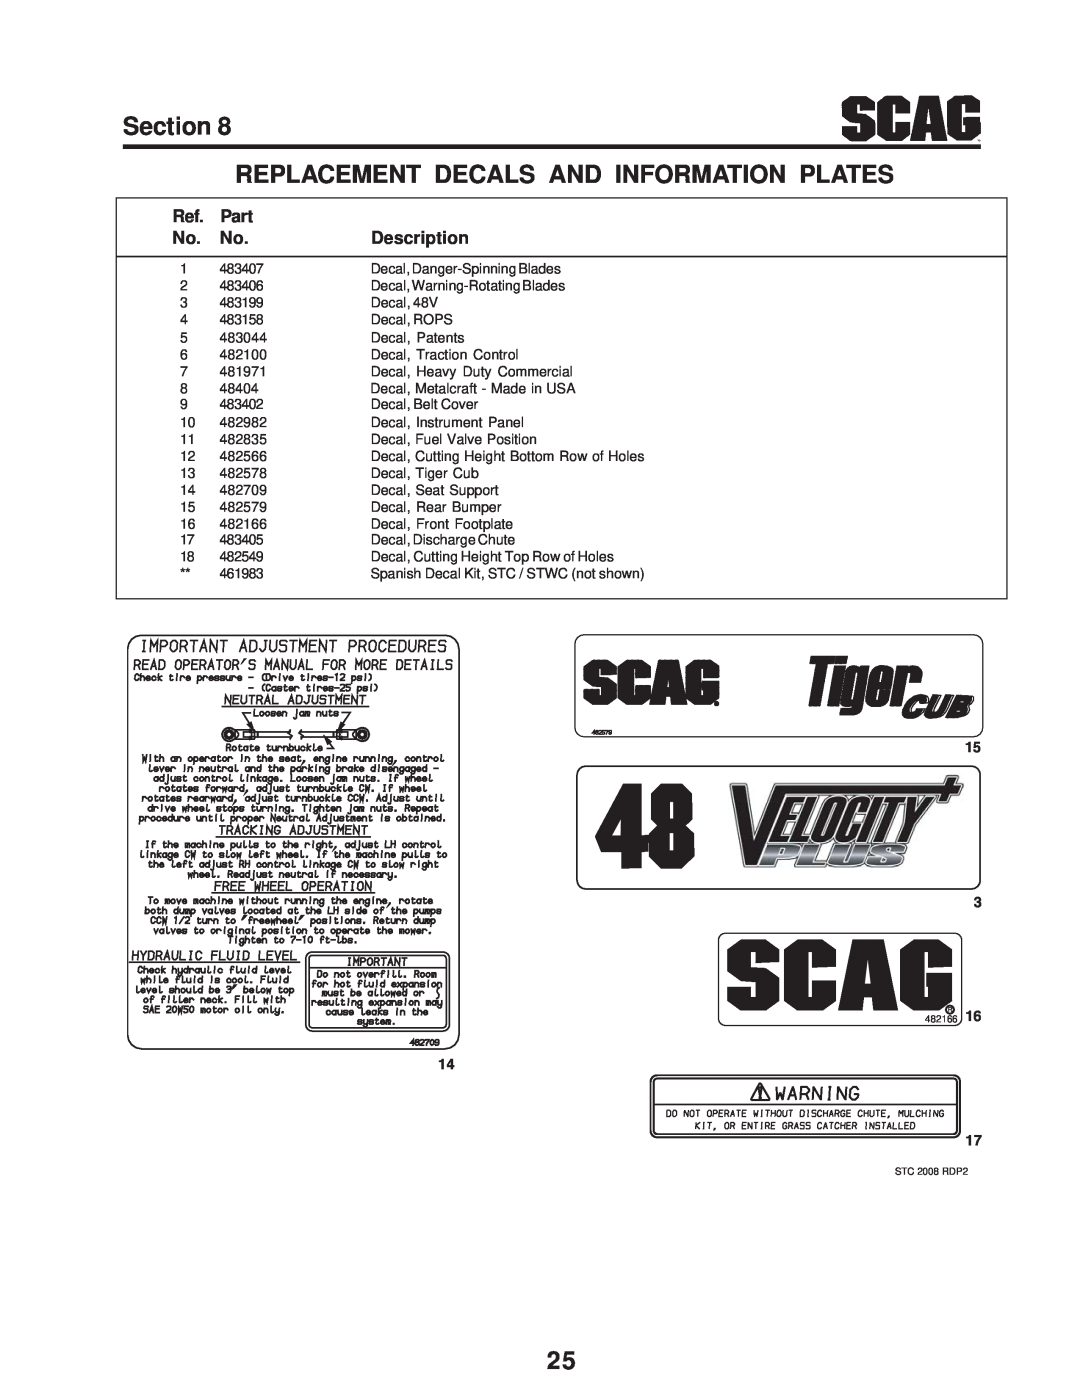 Scag Power Equipment SMTC-48V, STC48V-19KAI Section REPLACEMENT DECALS AND INFORMATION PLATES, Part, Description, 483407 